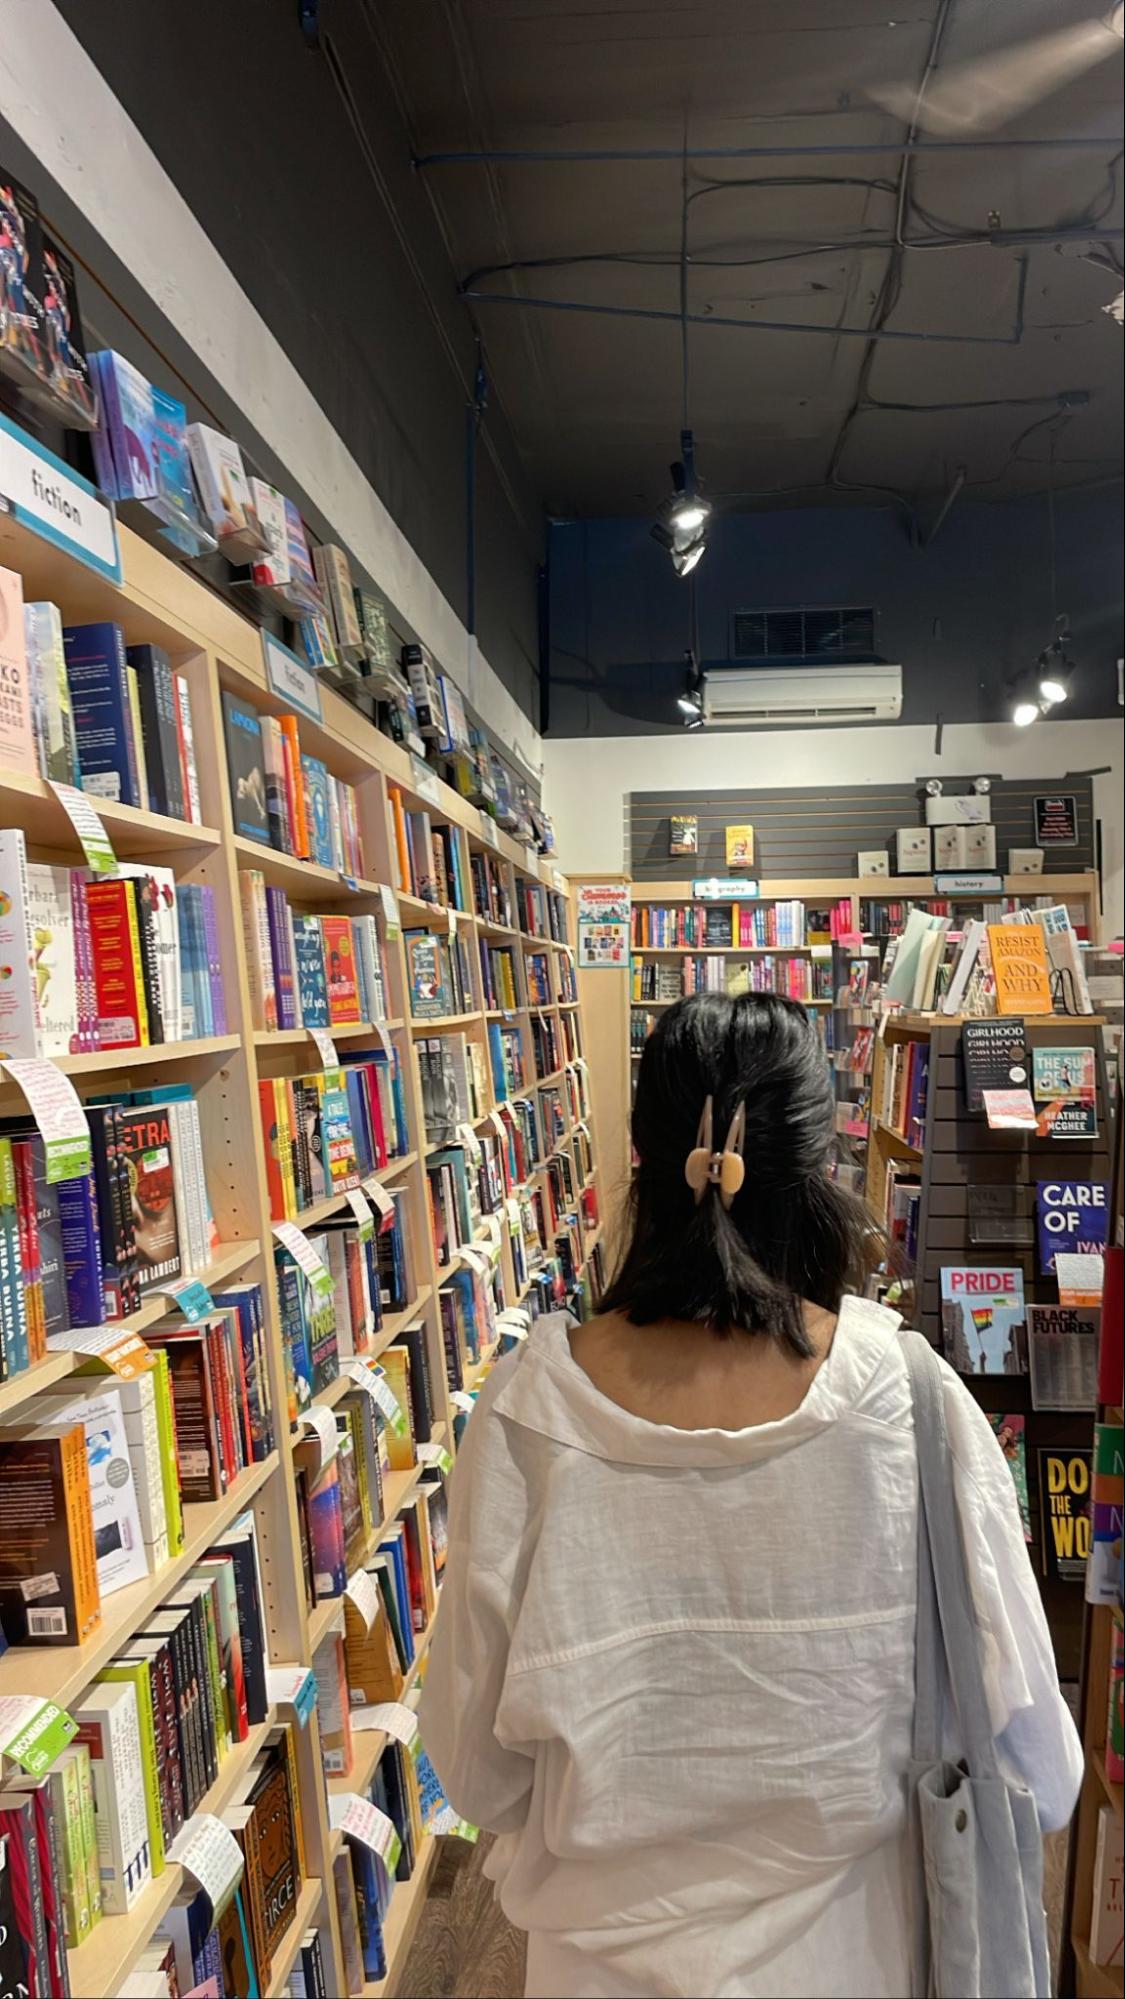 The back of a person walking through the aisle of a book shelf